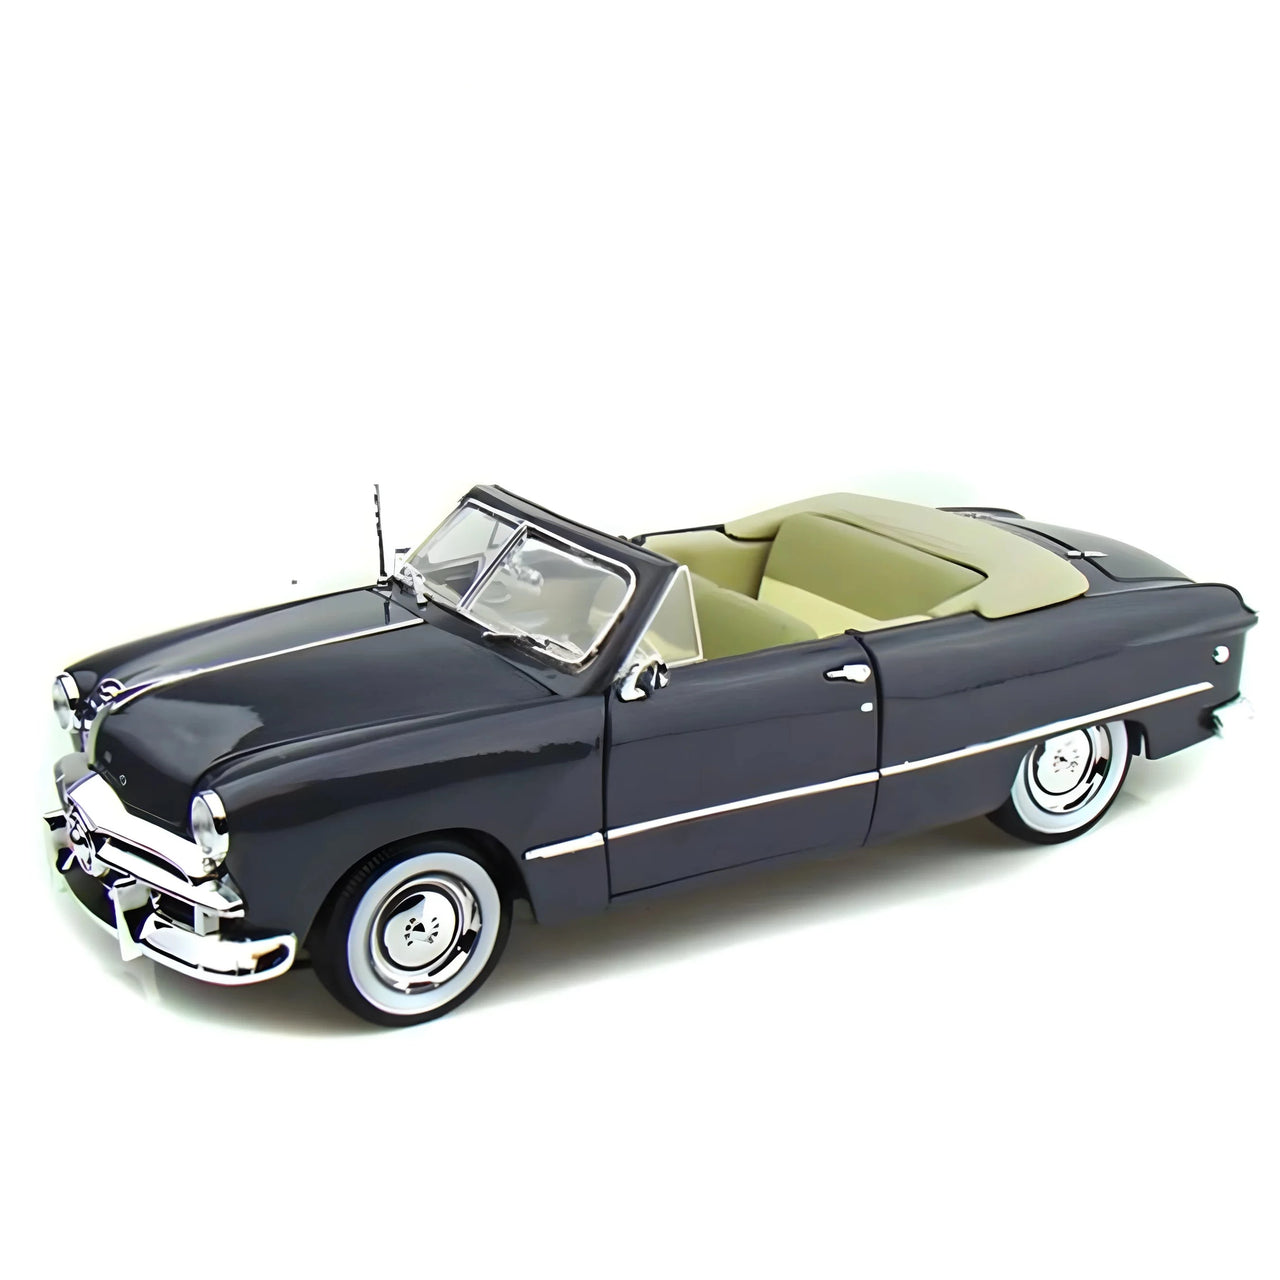 31682 Ford Convertible Year 1949 Scale 1:18 (Maisto Special Edition)